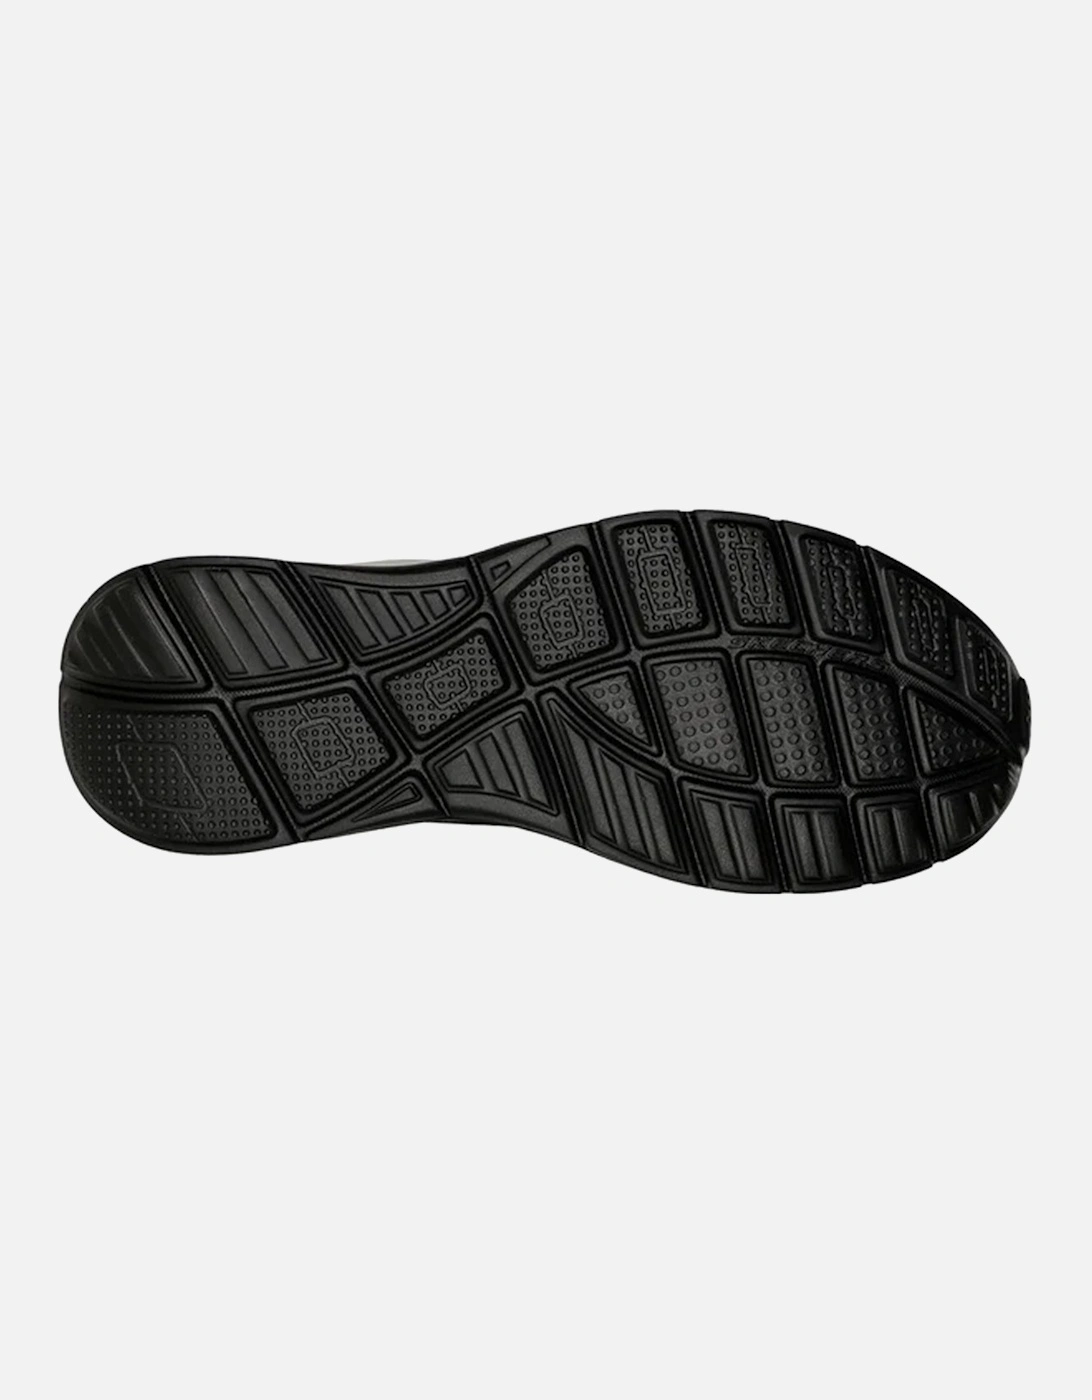 Mens Equalizer 5.0 Trainers